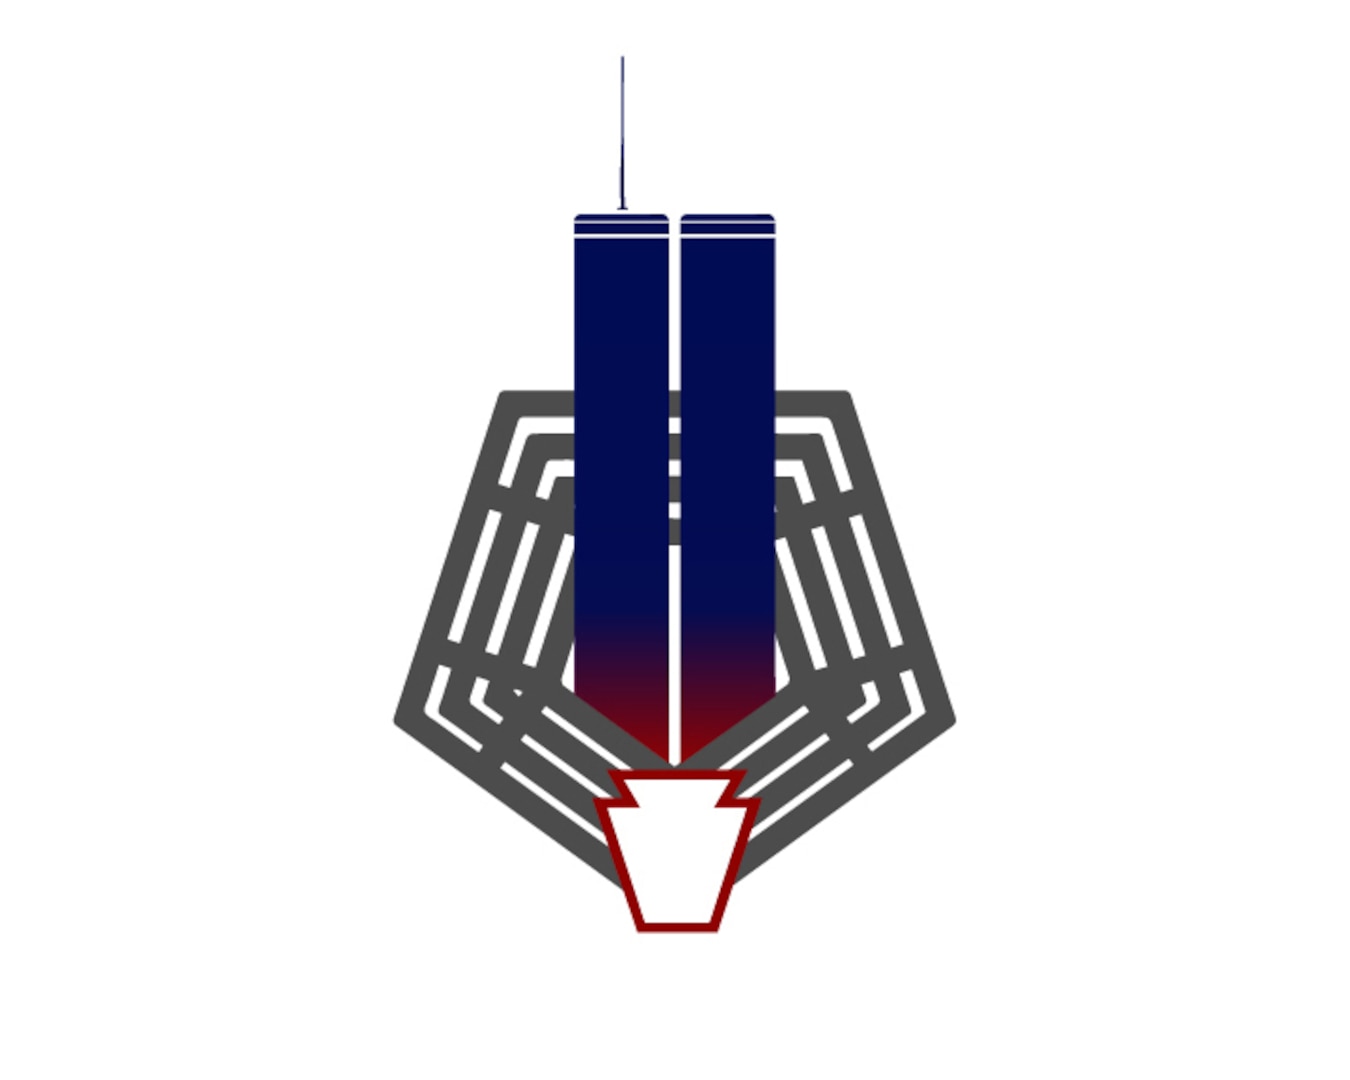 A graphic illustration of the World Trade Center Twin Towers coming out of the Pentagon with a keystone on the bottom. The towers’ gradient from blue to red symbolizes the lives lost on 9/11. As the nation commemorates the tragic day 20 years ago, National Guard members and retirees reflect on their experiences, and how the day’s events changed the course of the Guard.